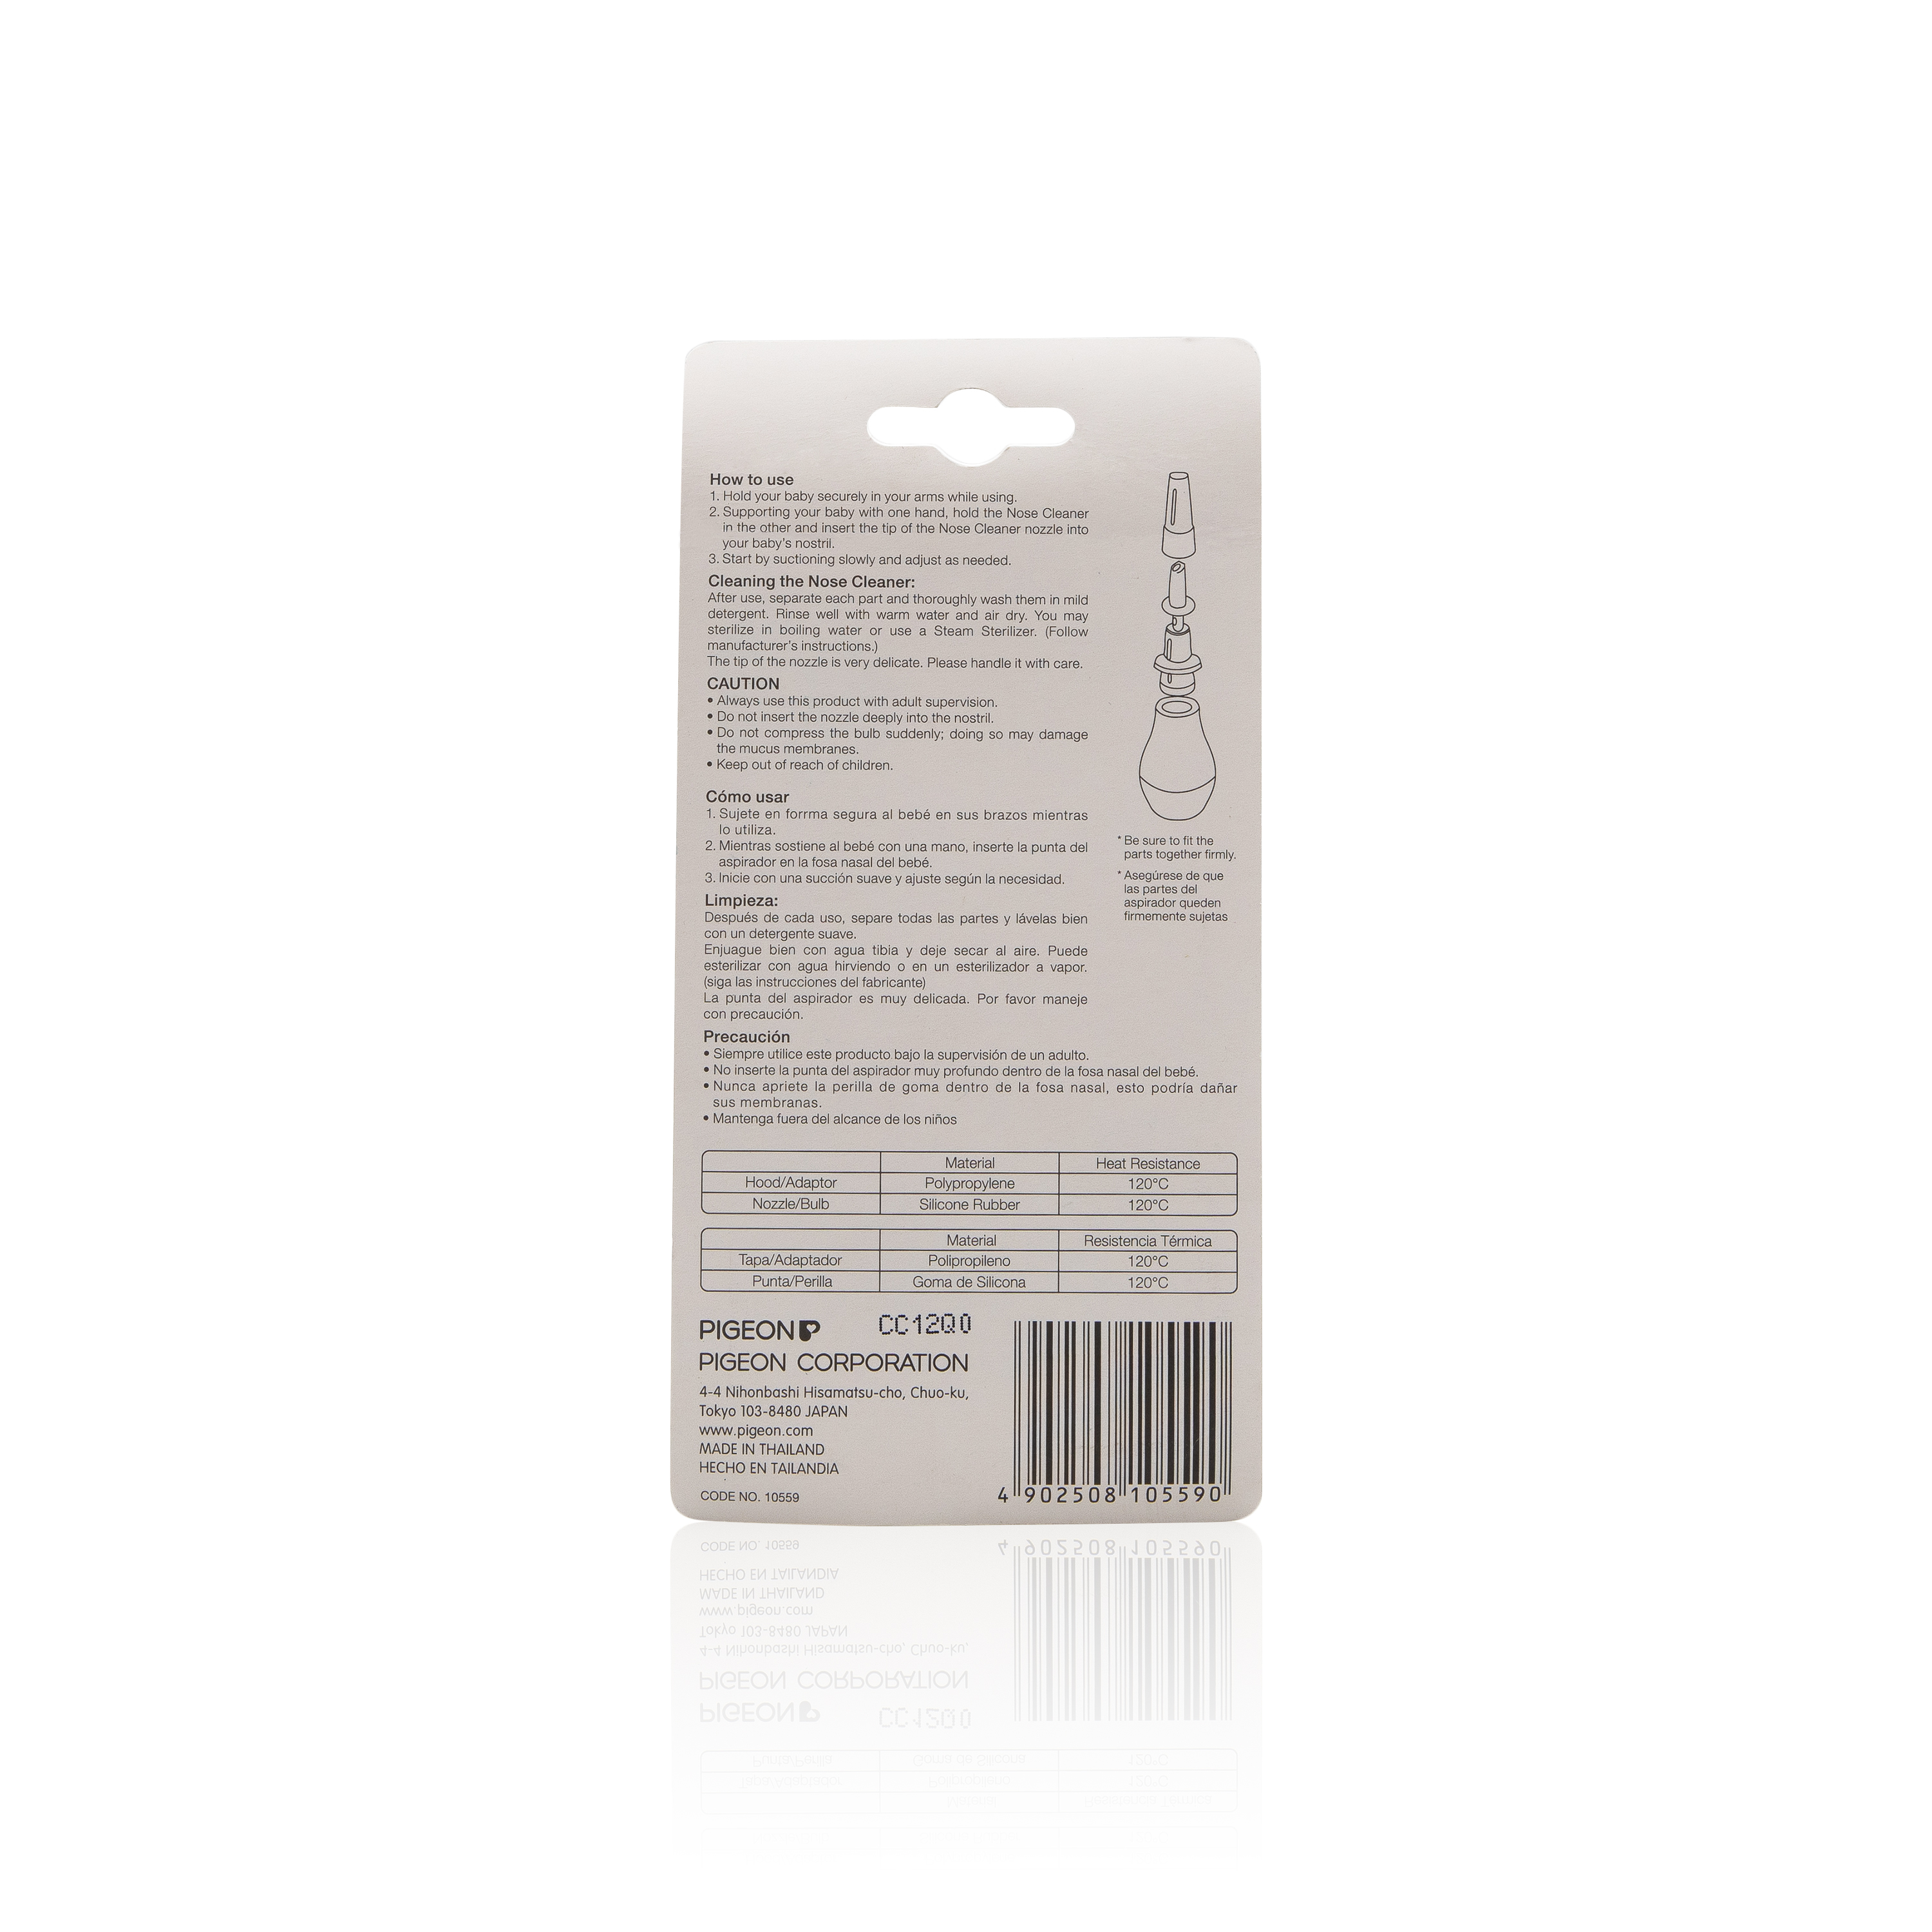 Pigeon Nose Cleaner Blister Pack (PG-10559)